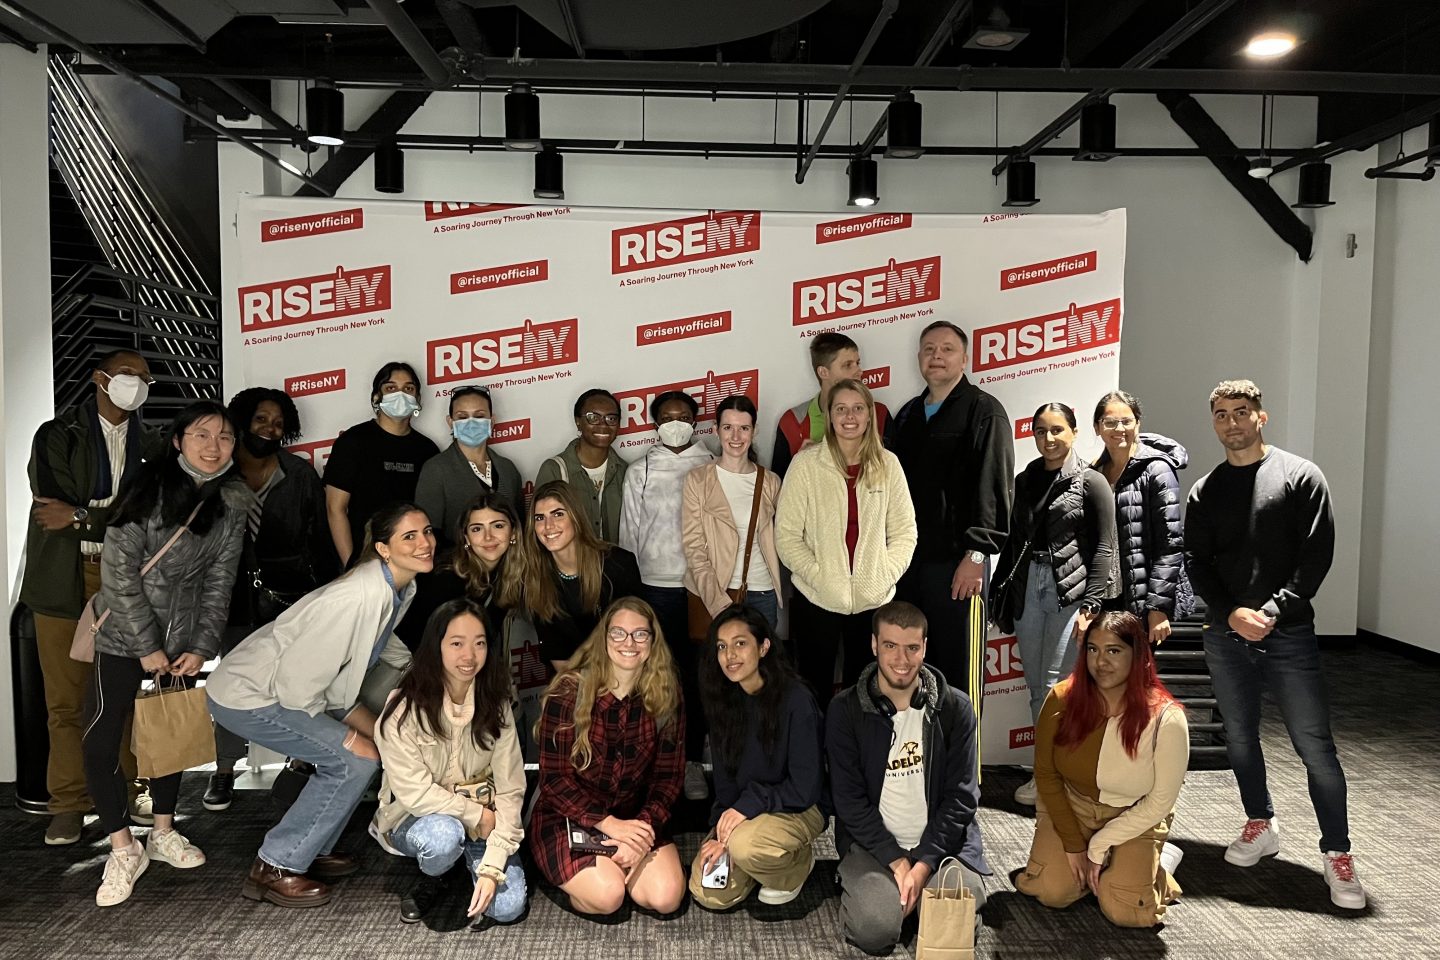 A group photo of 21 people standing and kneeling indoors in front of a backdrop with repeating red and white branding that reads "RISENY" and "A Soaring Journey Through New York." The group appears to be in casual attire, with some individuals wearing masks.